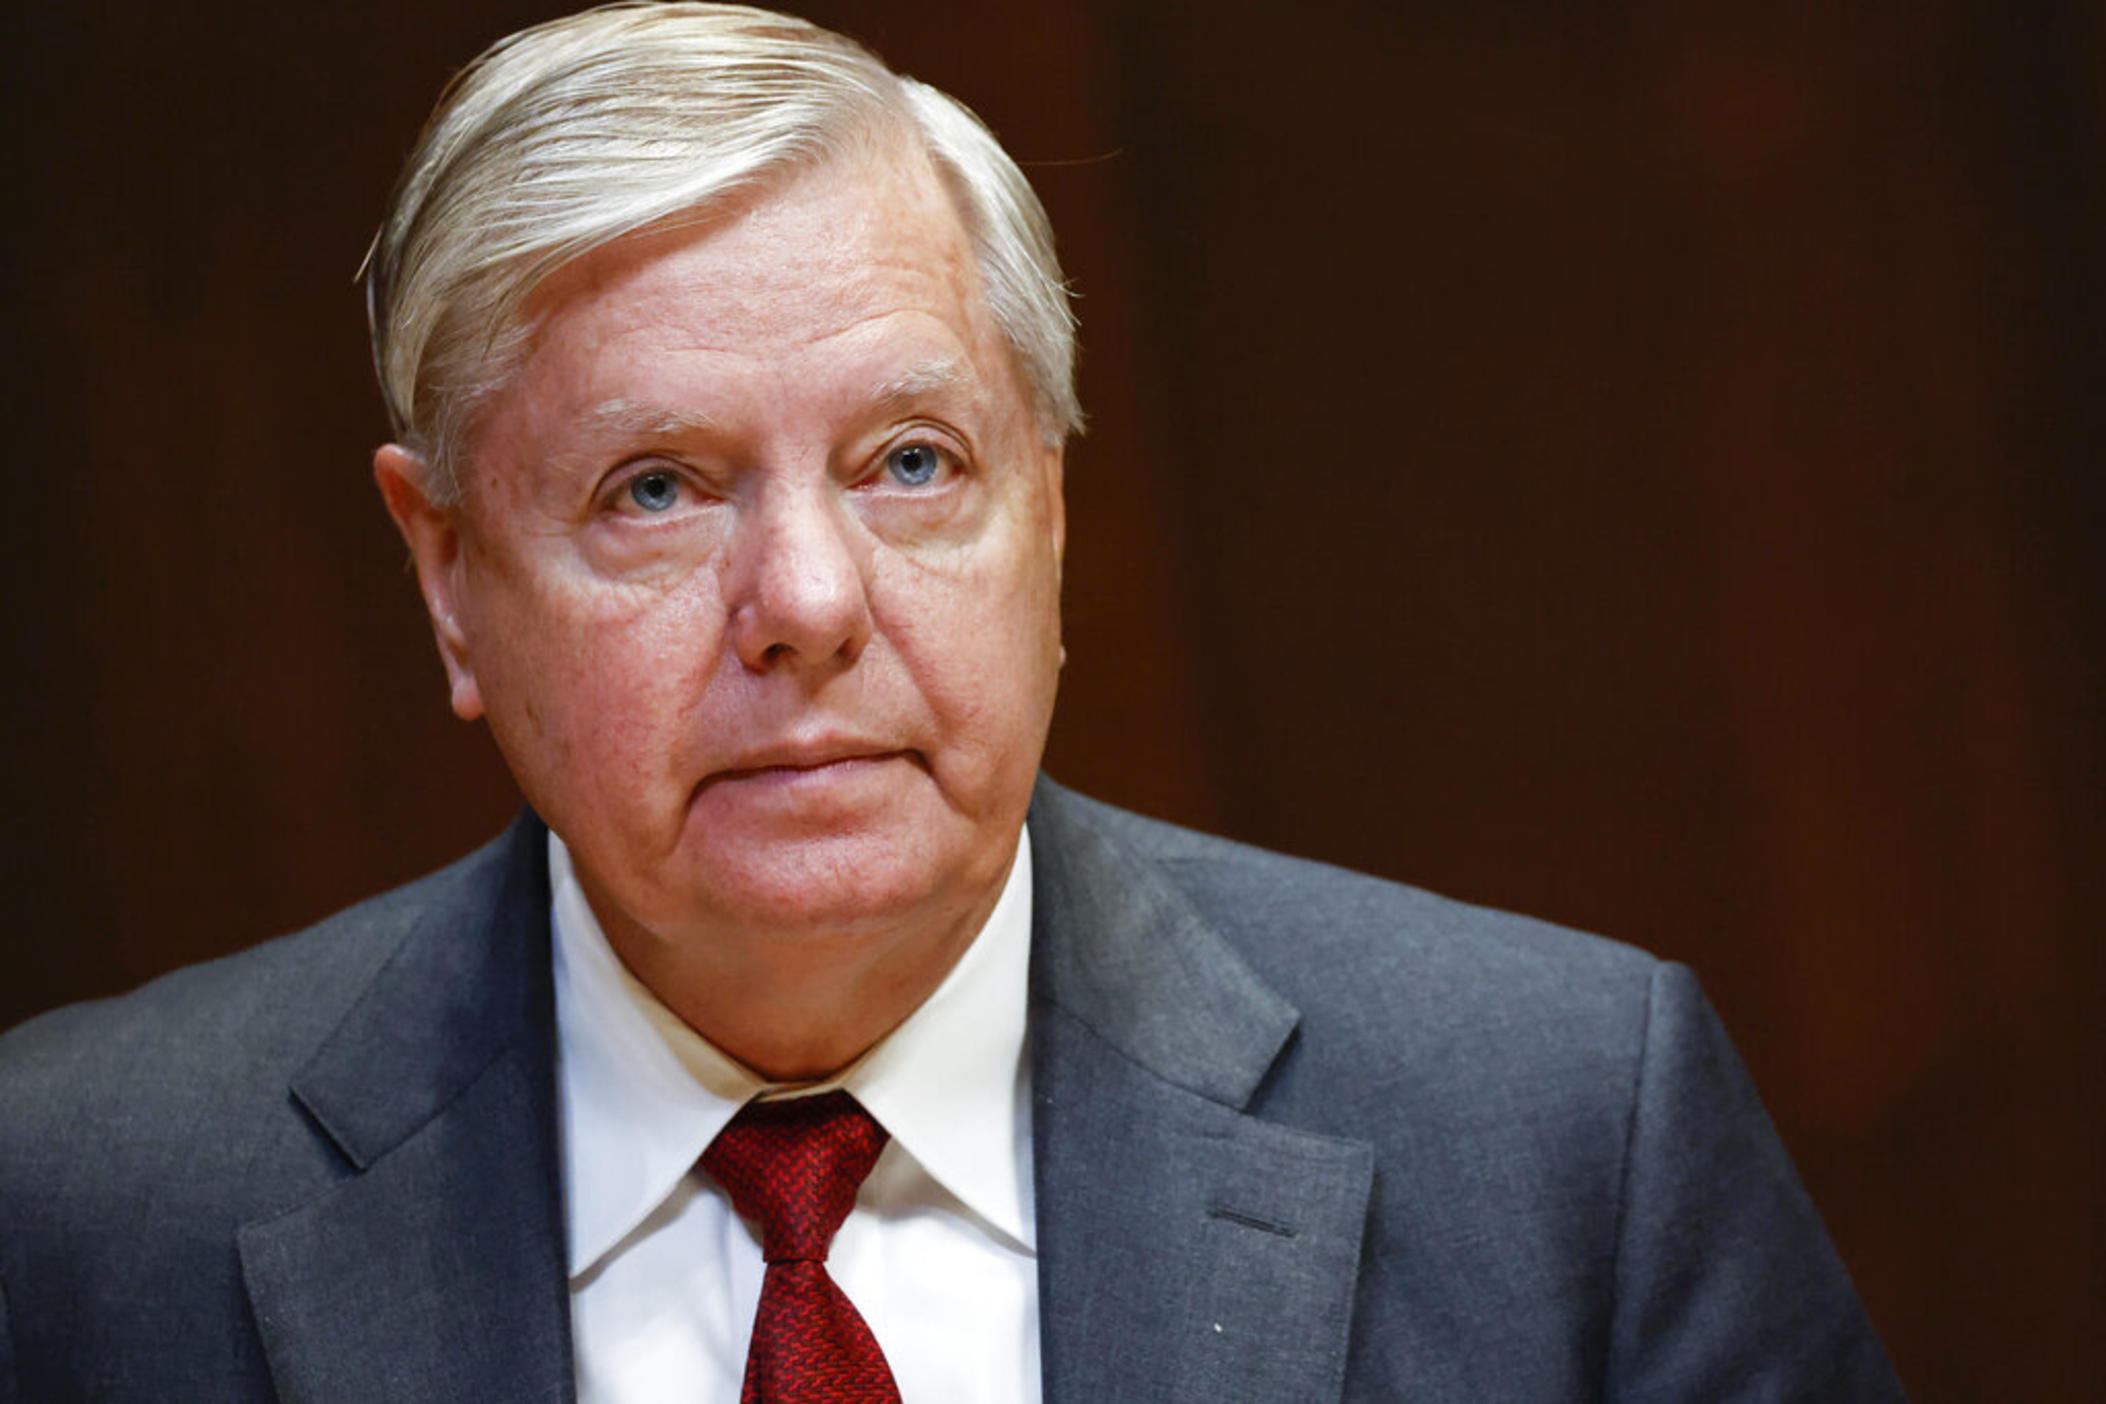 Sen. Lindsey Graham, R-S.C., listens during a hearing on the fiscal year 2023 budget for the FBI in Washington, on May 25, 2022. Attorneys for Graham said in a court filing on July 13, he wasn't trying to interfere in Georgia's 2020 election when he called state officials to ask them to reexamine certain absentee ballots after President Donald Trump's narrow loss to Democrat Joe Biden.